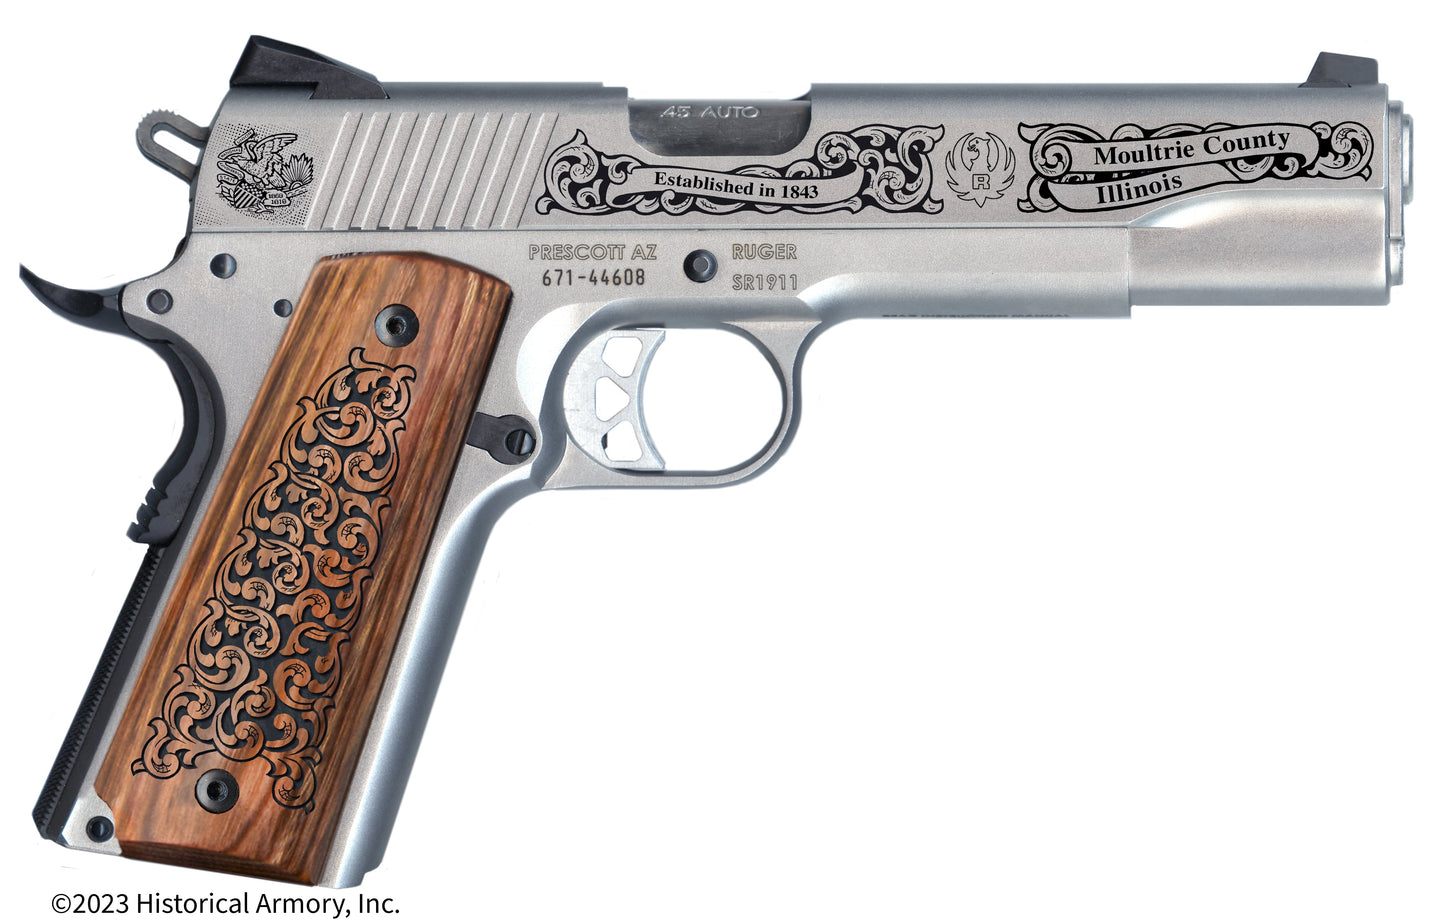 Moultrie County Illinois Engraved .45 Auto Ruger 1911